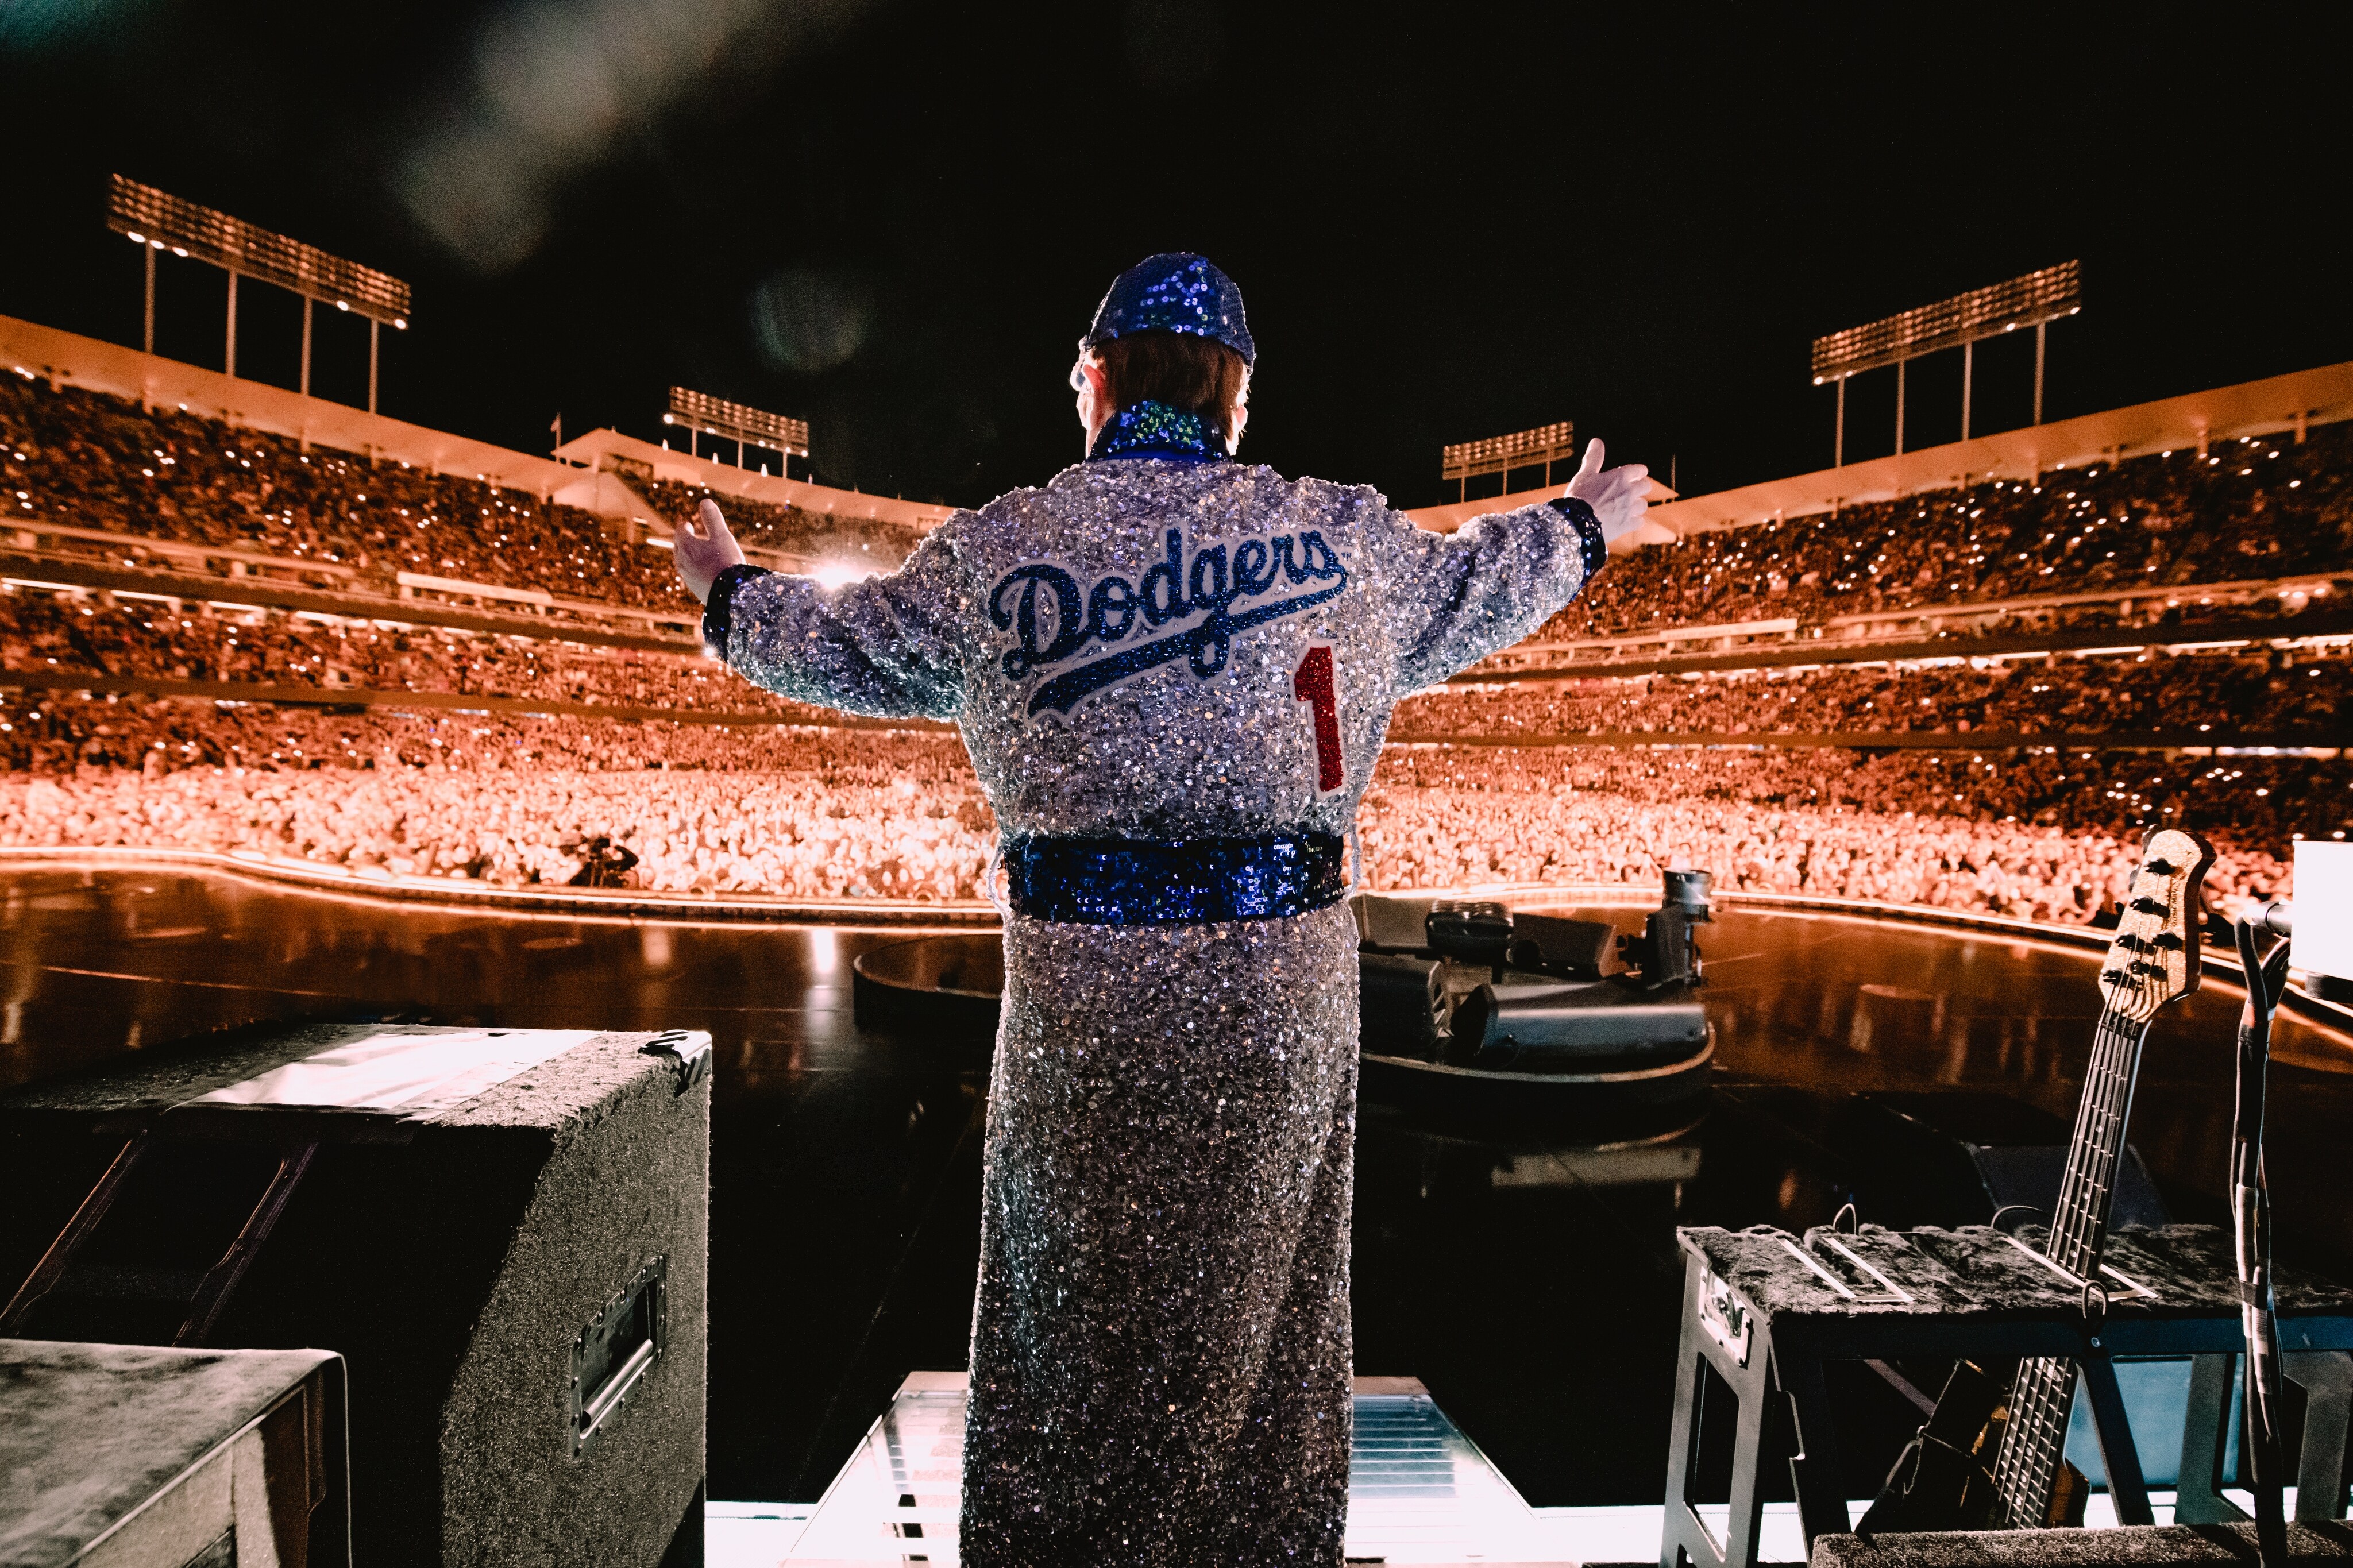 DISNEY+ RELEASES PHOTOS AND FOOTAGE FROM ITS THREE-HOUR LIVESTREAM EVENT “ELTON JOHN LIVE FAREWELL FROM DODGER STADIUM” AS ELTON TAKES HIS FINAL NORTH AMERICAN BOW UK Press